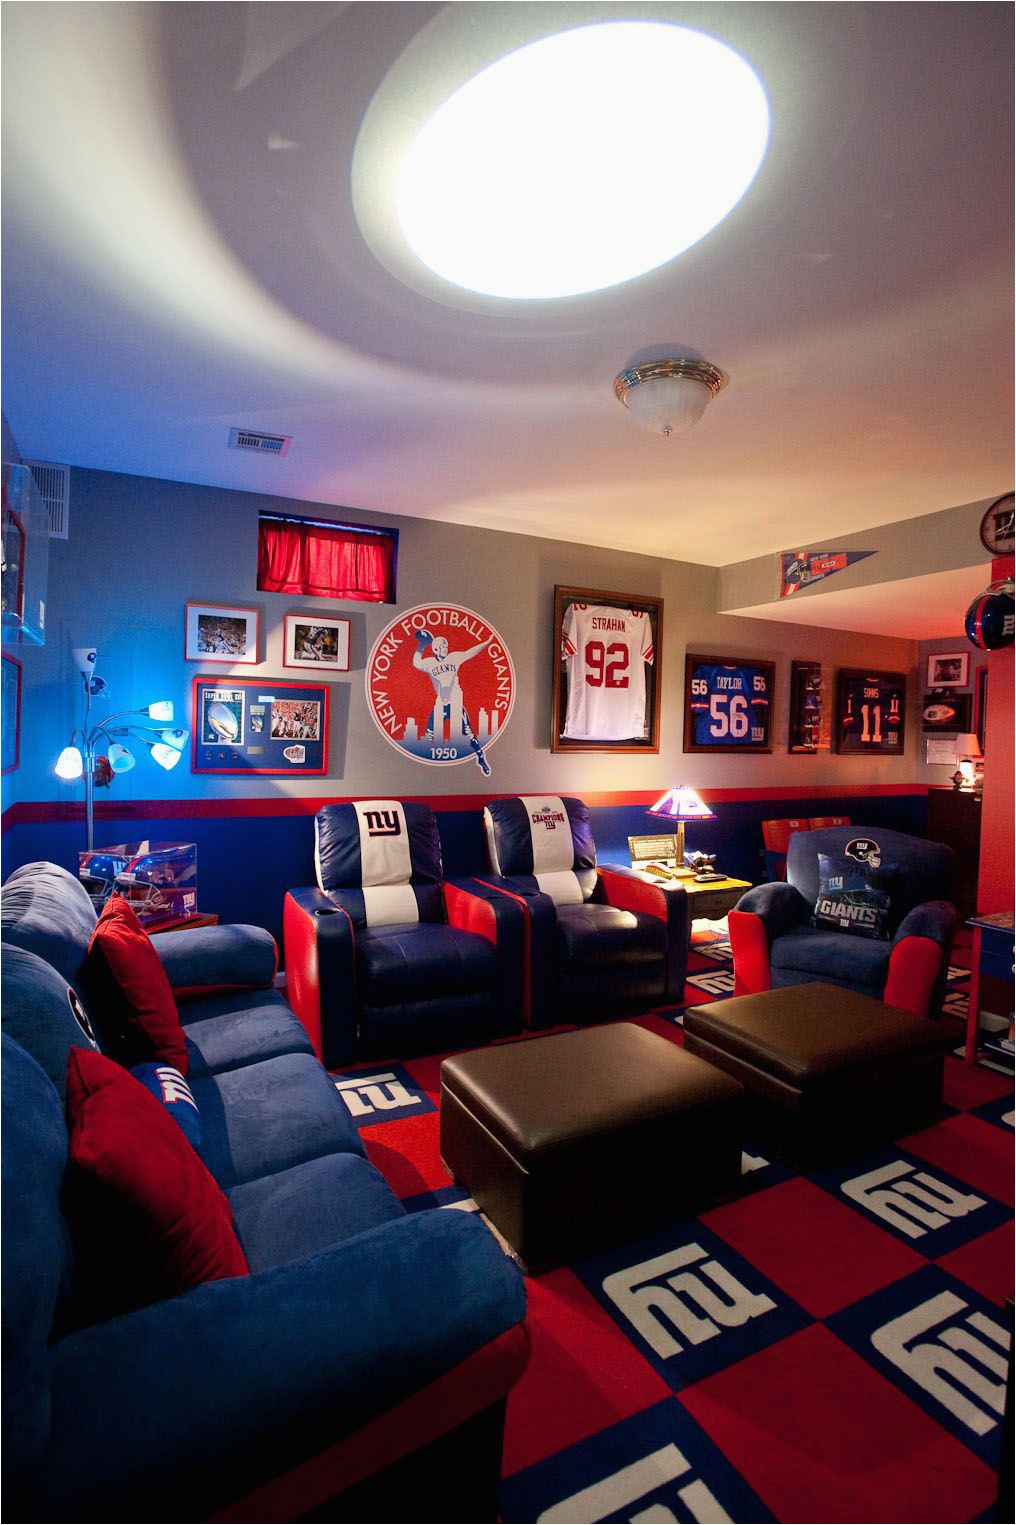 New York Giants area Rug New York Giants Room My Dream House Will Have This Just for